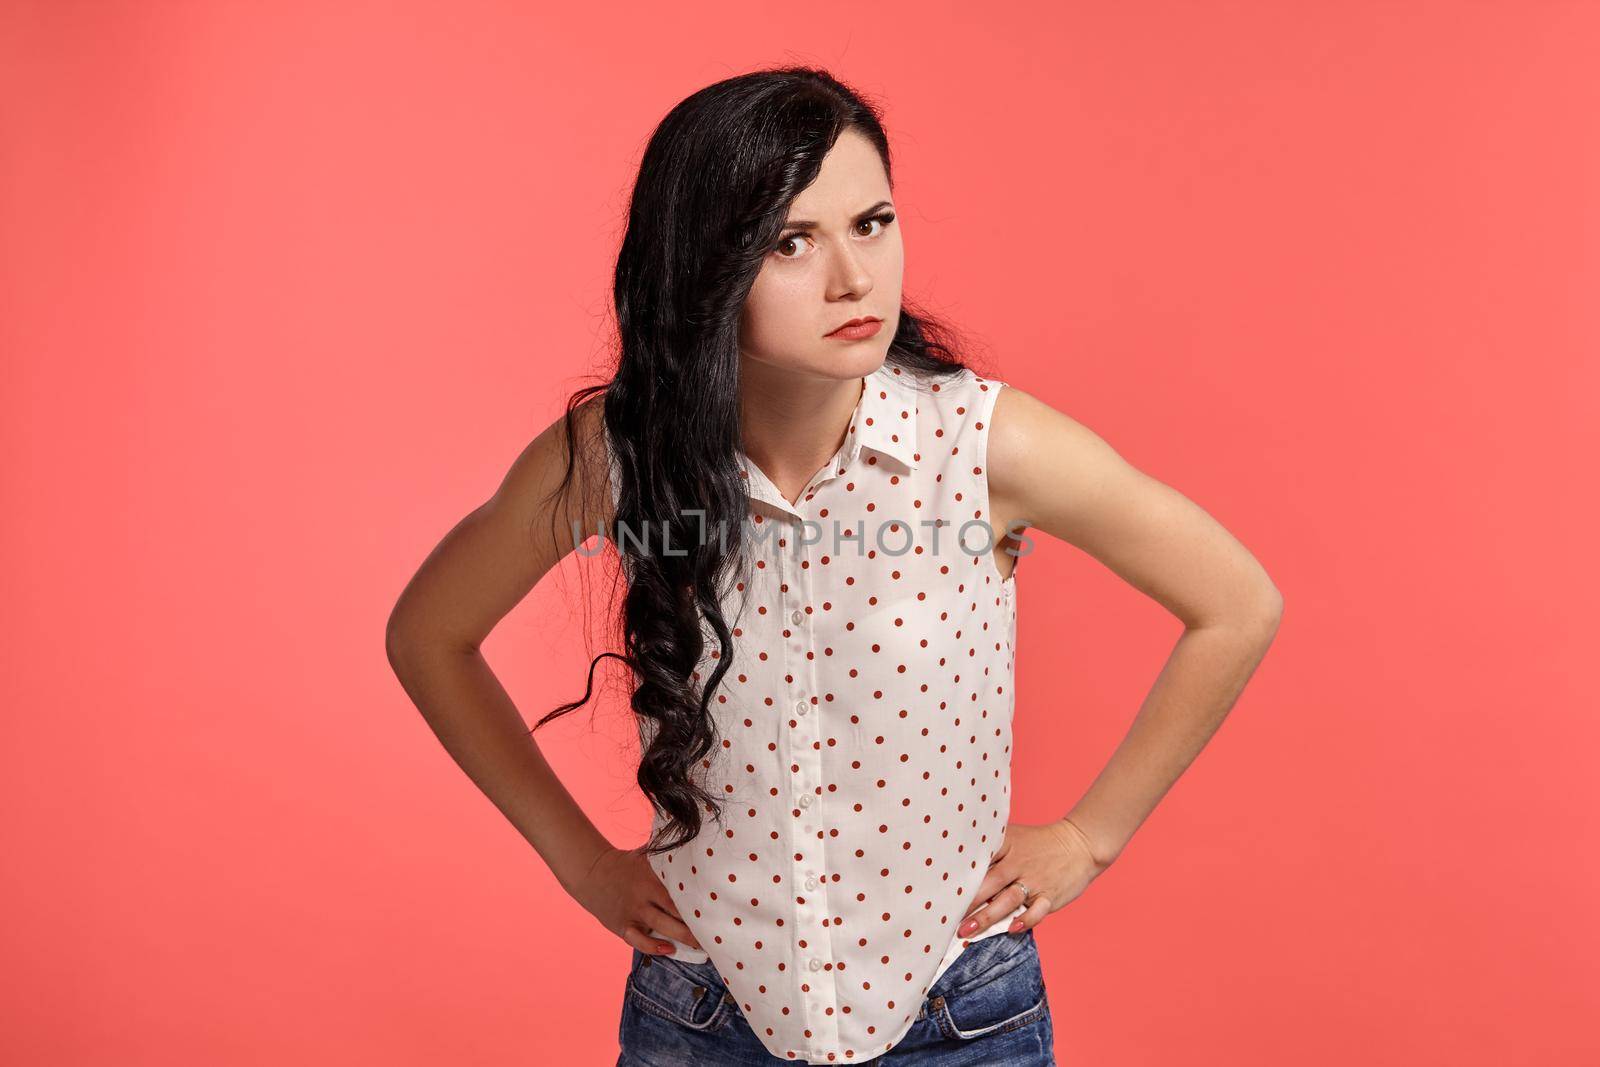 Studio shot of a good-looking little woman, wearing casual white polka dot blouse. Little brunette female is acting like suspect someone, posing over a pink background. People and sincere emotions.